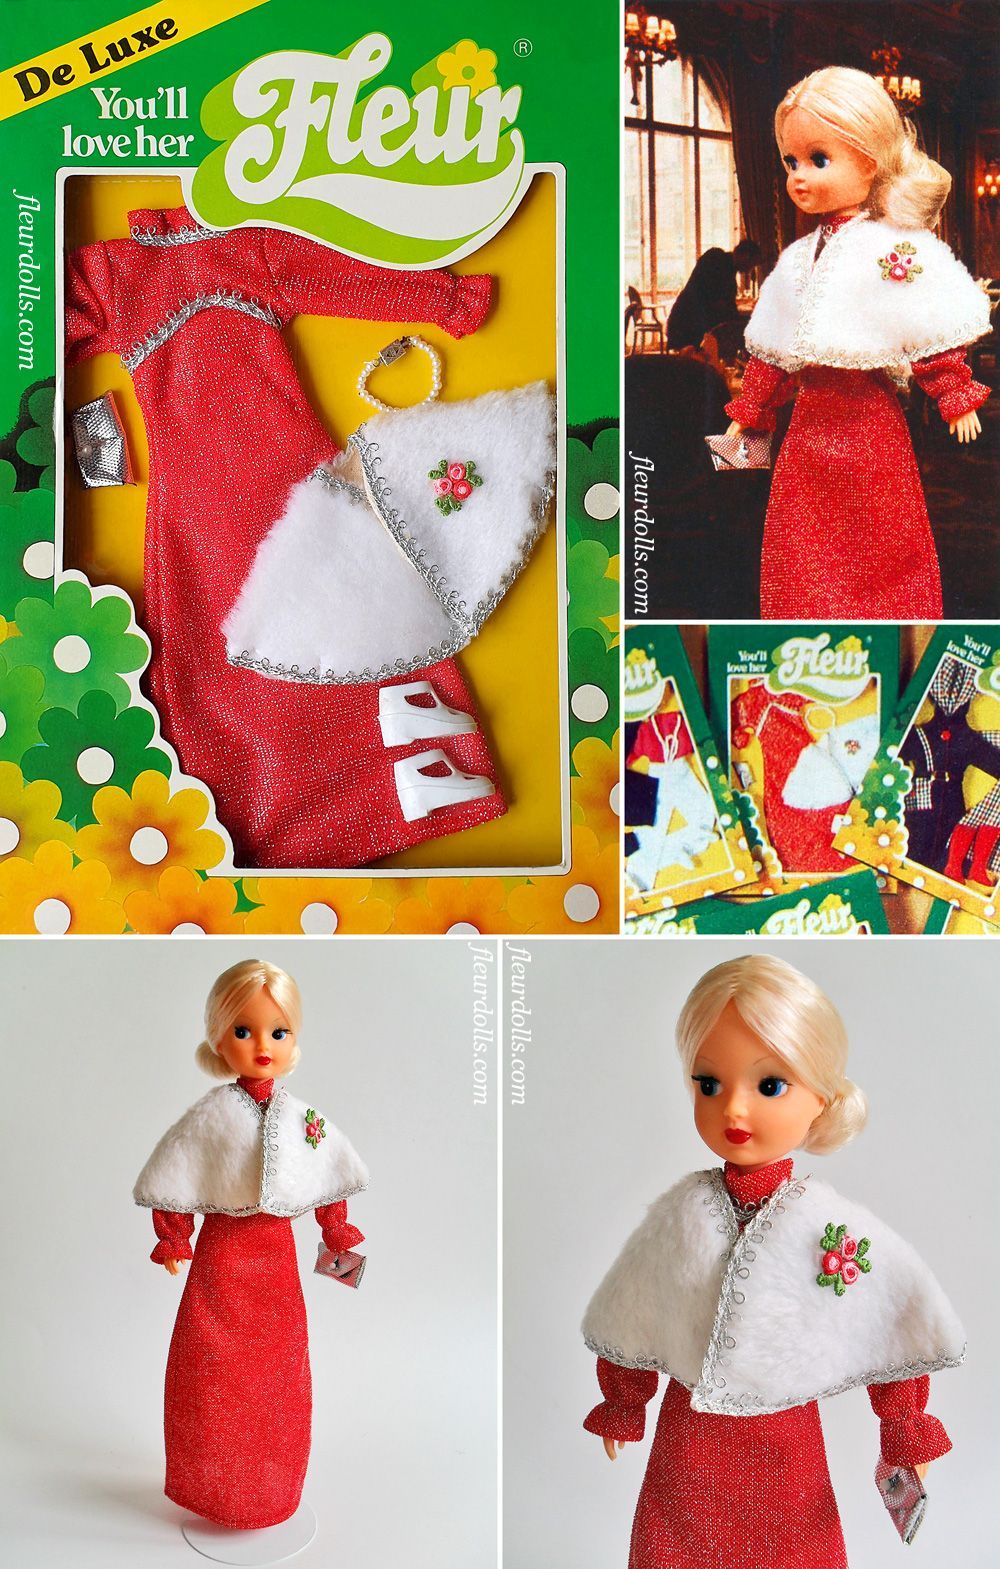 Fleur doll red theatre dress fashion 1234 red glitter outfit white fur